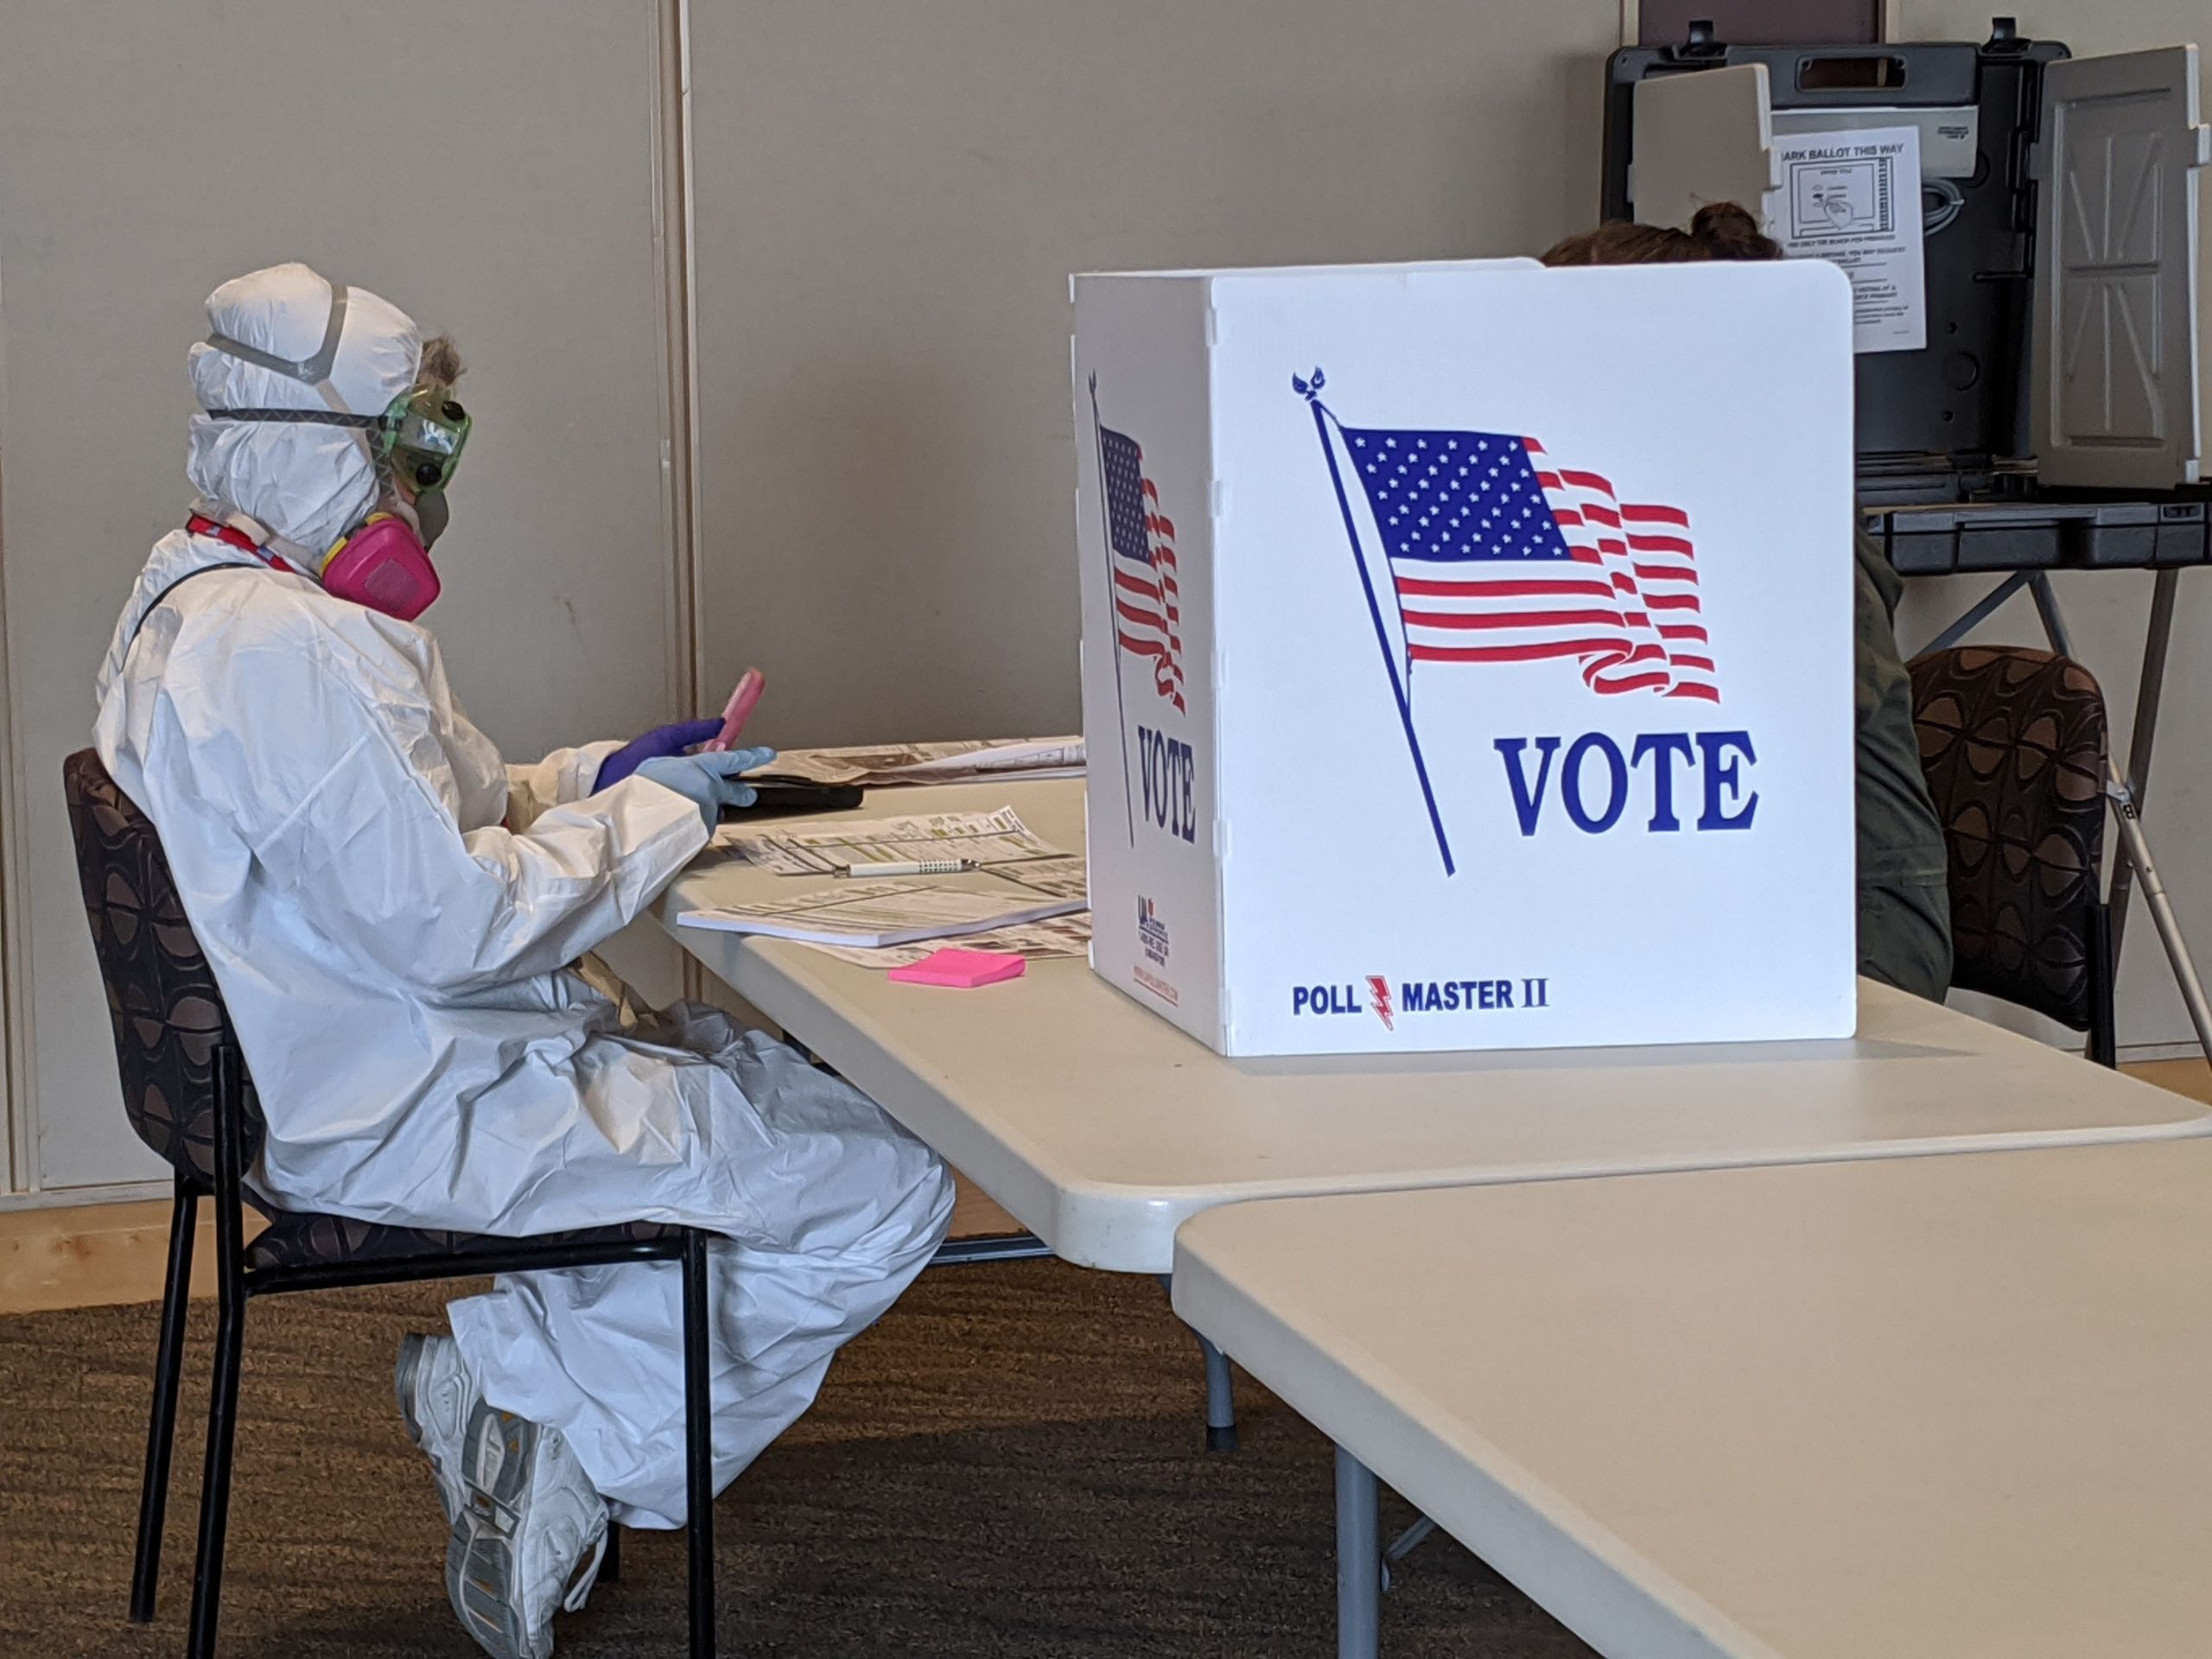 Derek R. Henkle/AFP via Getty Images Caption: Elections Chief Inspector Mary Magdalen Moser runs a polling location in Kenosha, Wisconsin, in full hazmat gear as the Wisconsin primary kicks off despite the coronavirus pandemic, on April 7.